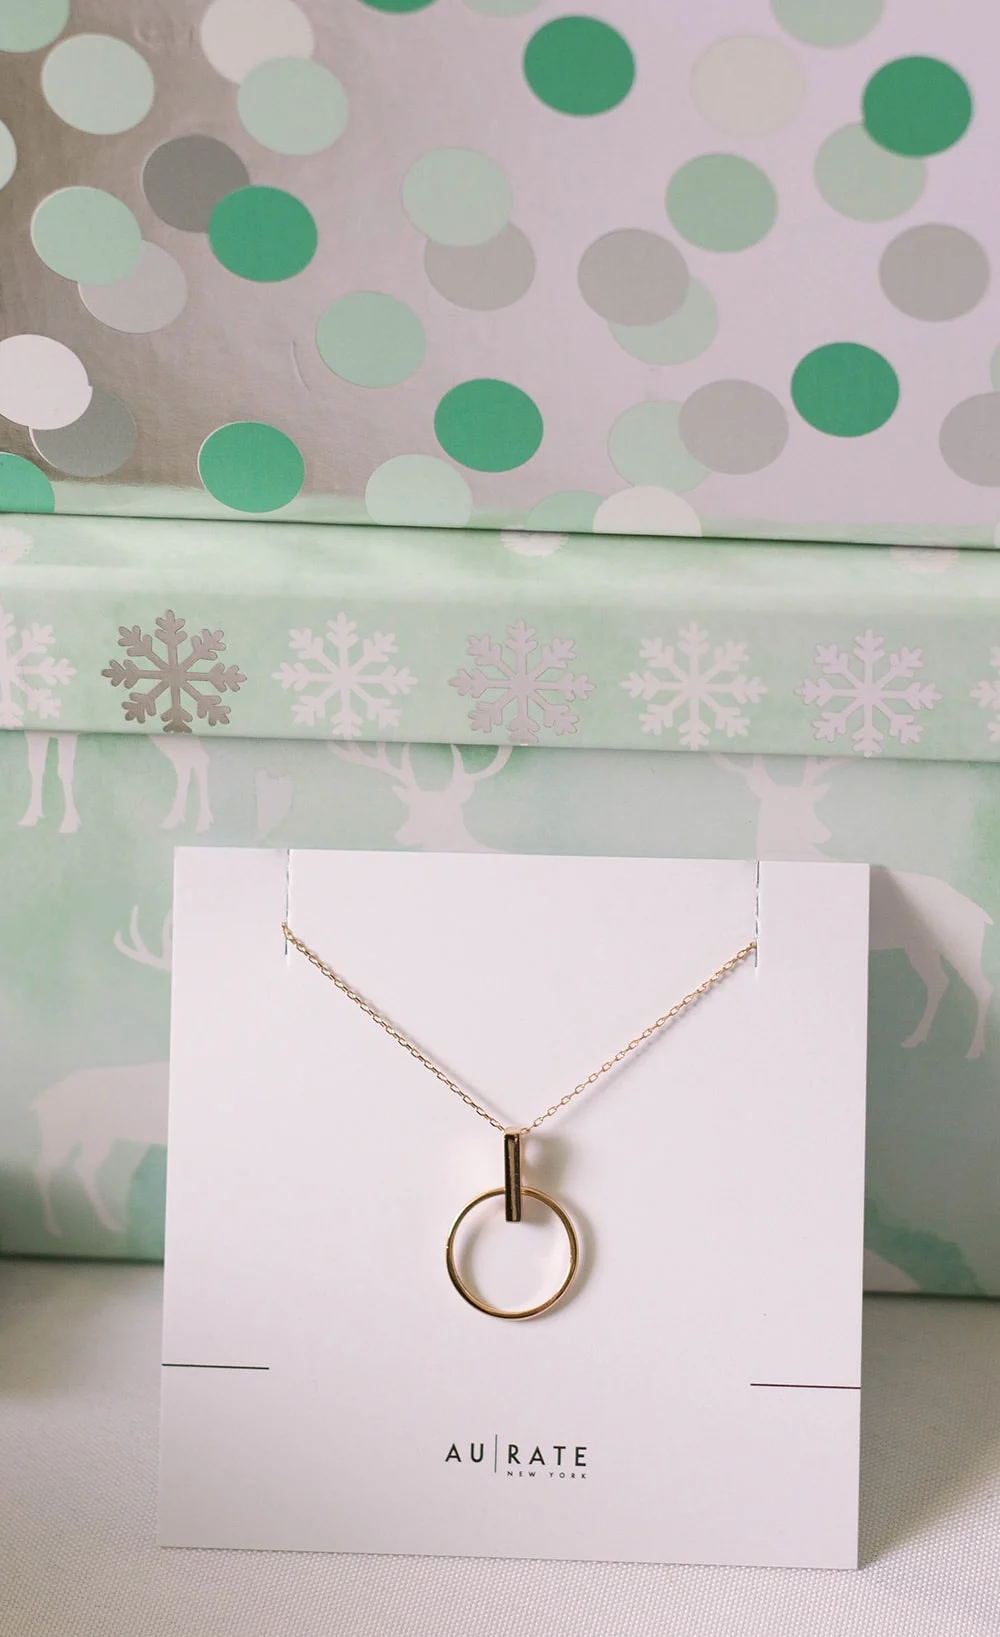 Necklace from Aurate in front of gift boxes.